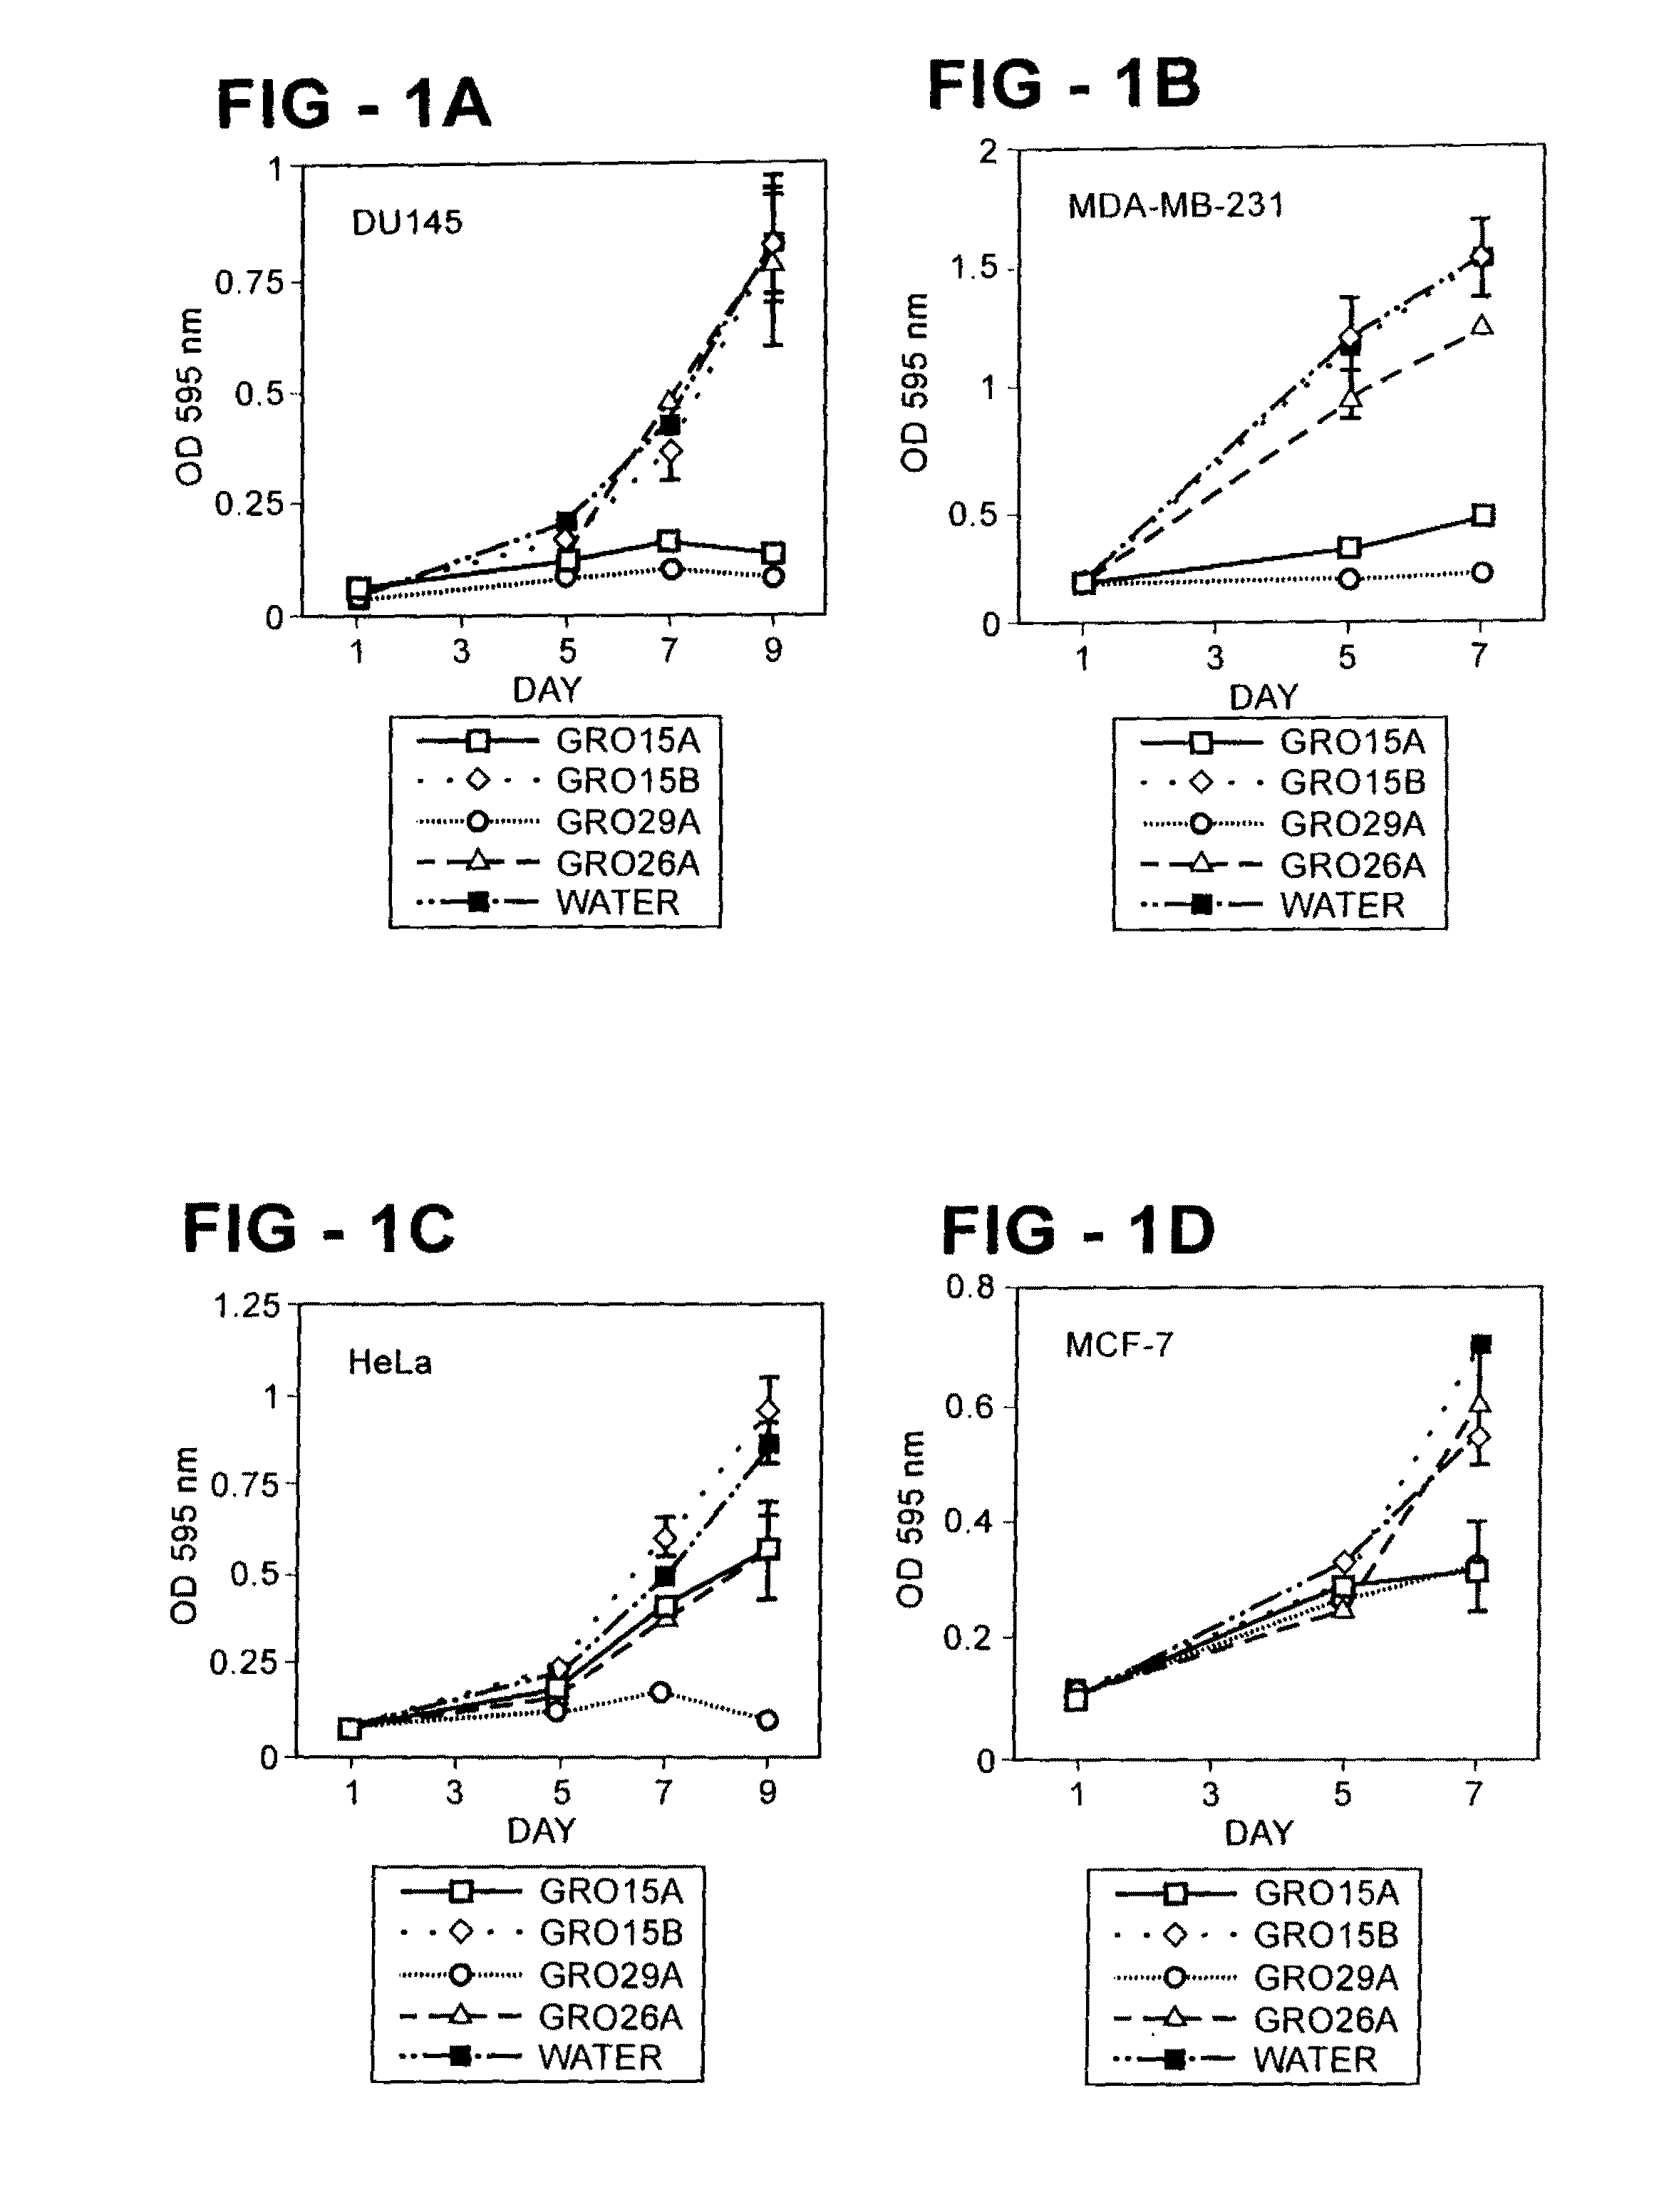 Antiproliferative activity of G-rich oligonucleotides and method of using same to bind to nucleolin